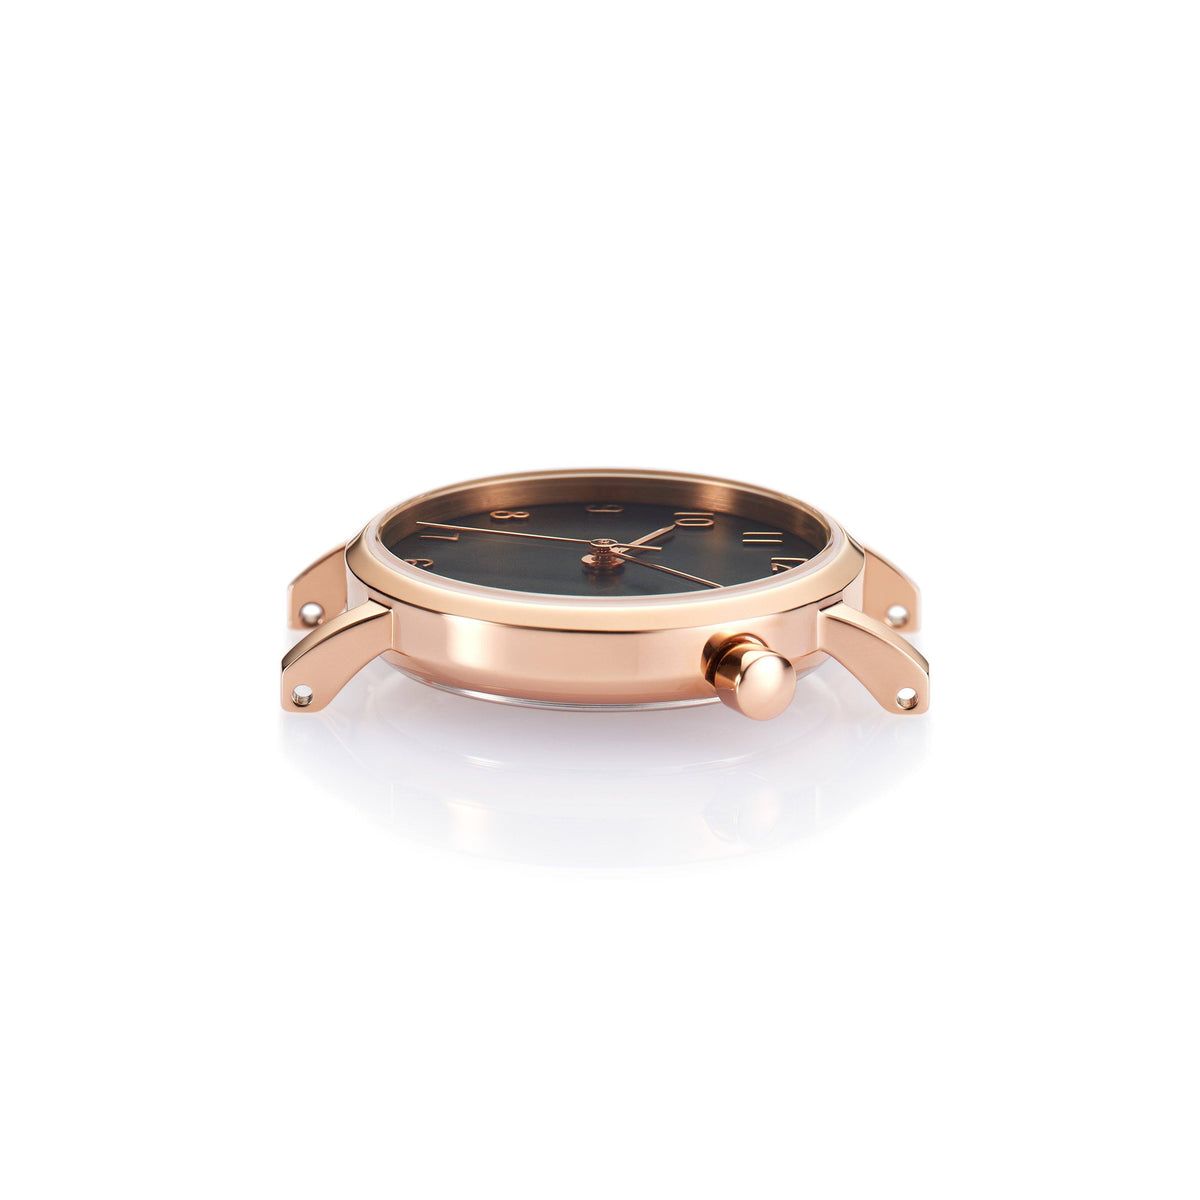 The Black and Rose Gold Watch - Midnight (Kids)